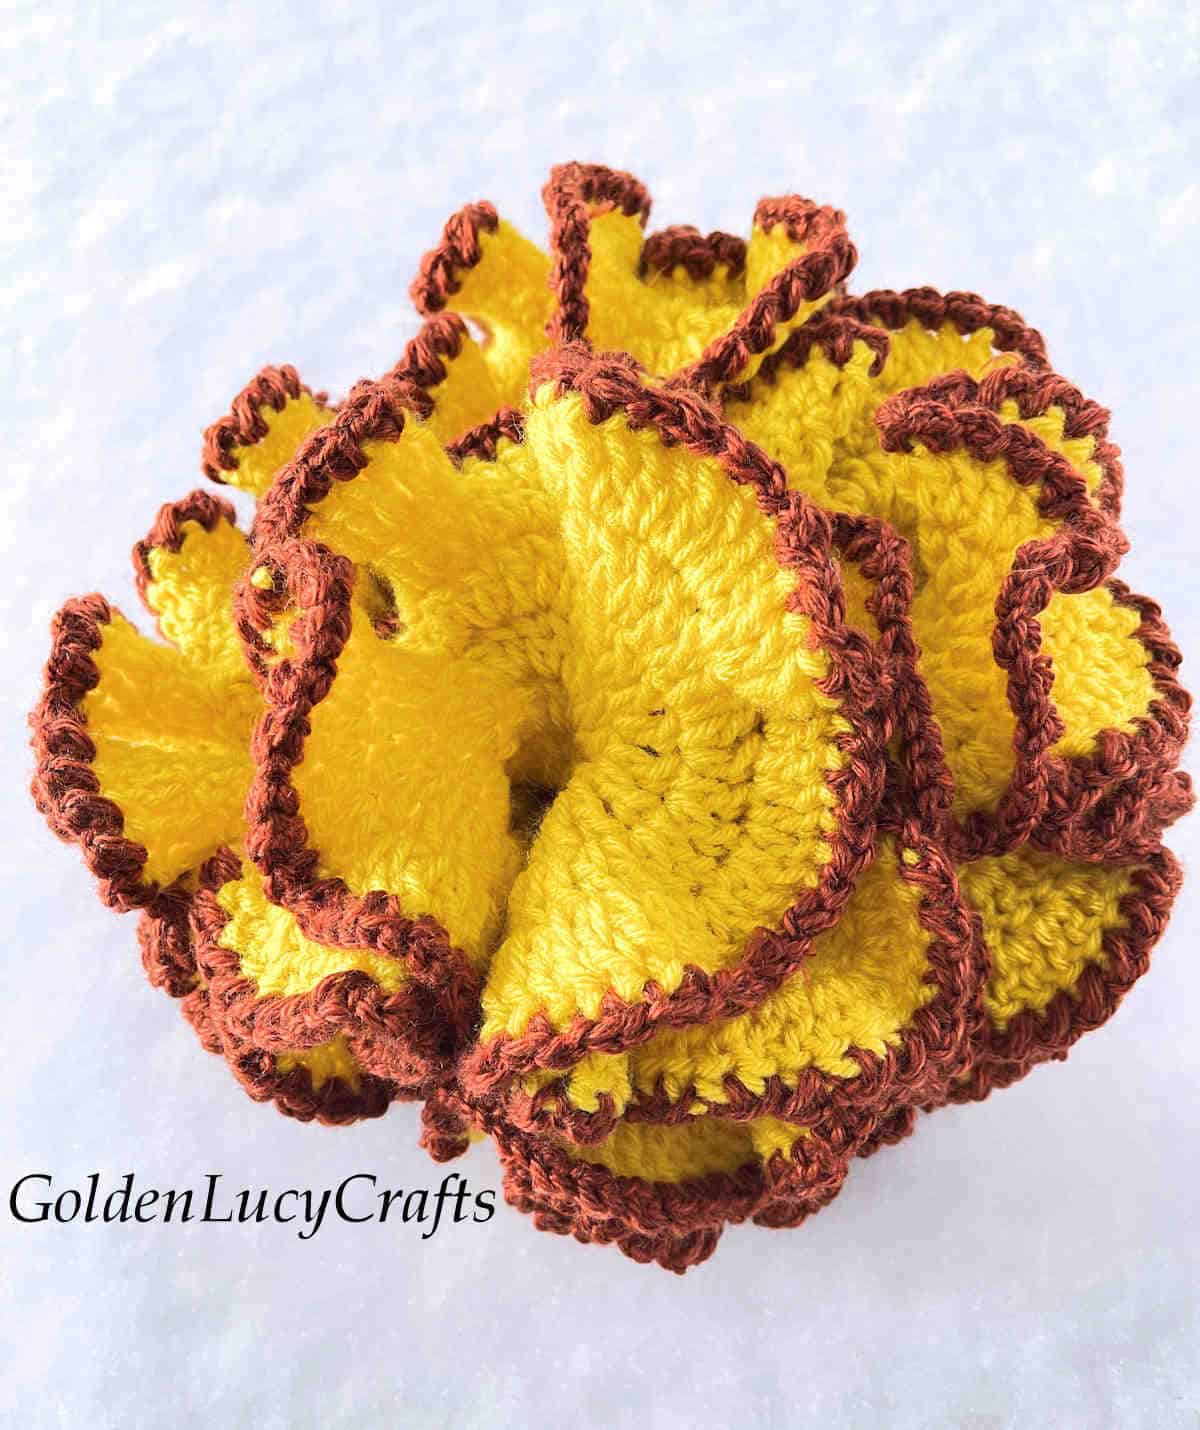 Yellow with brown edging crocheted hyperbolic coral.